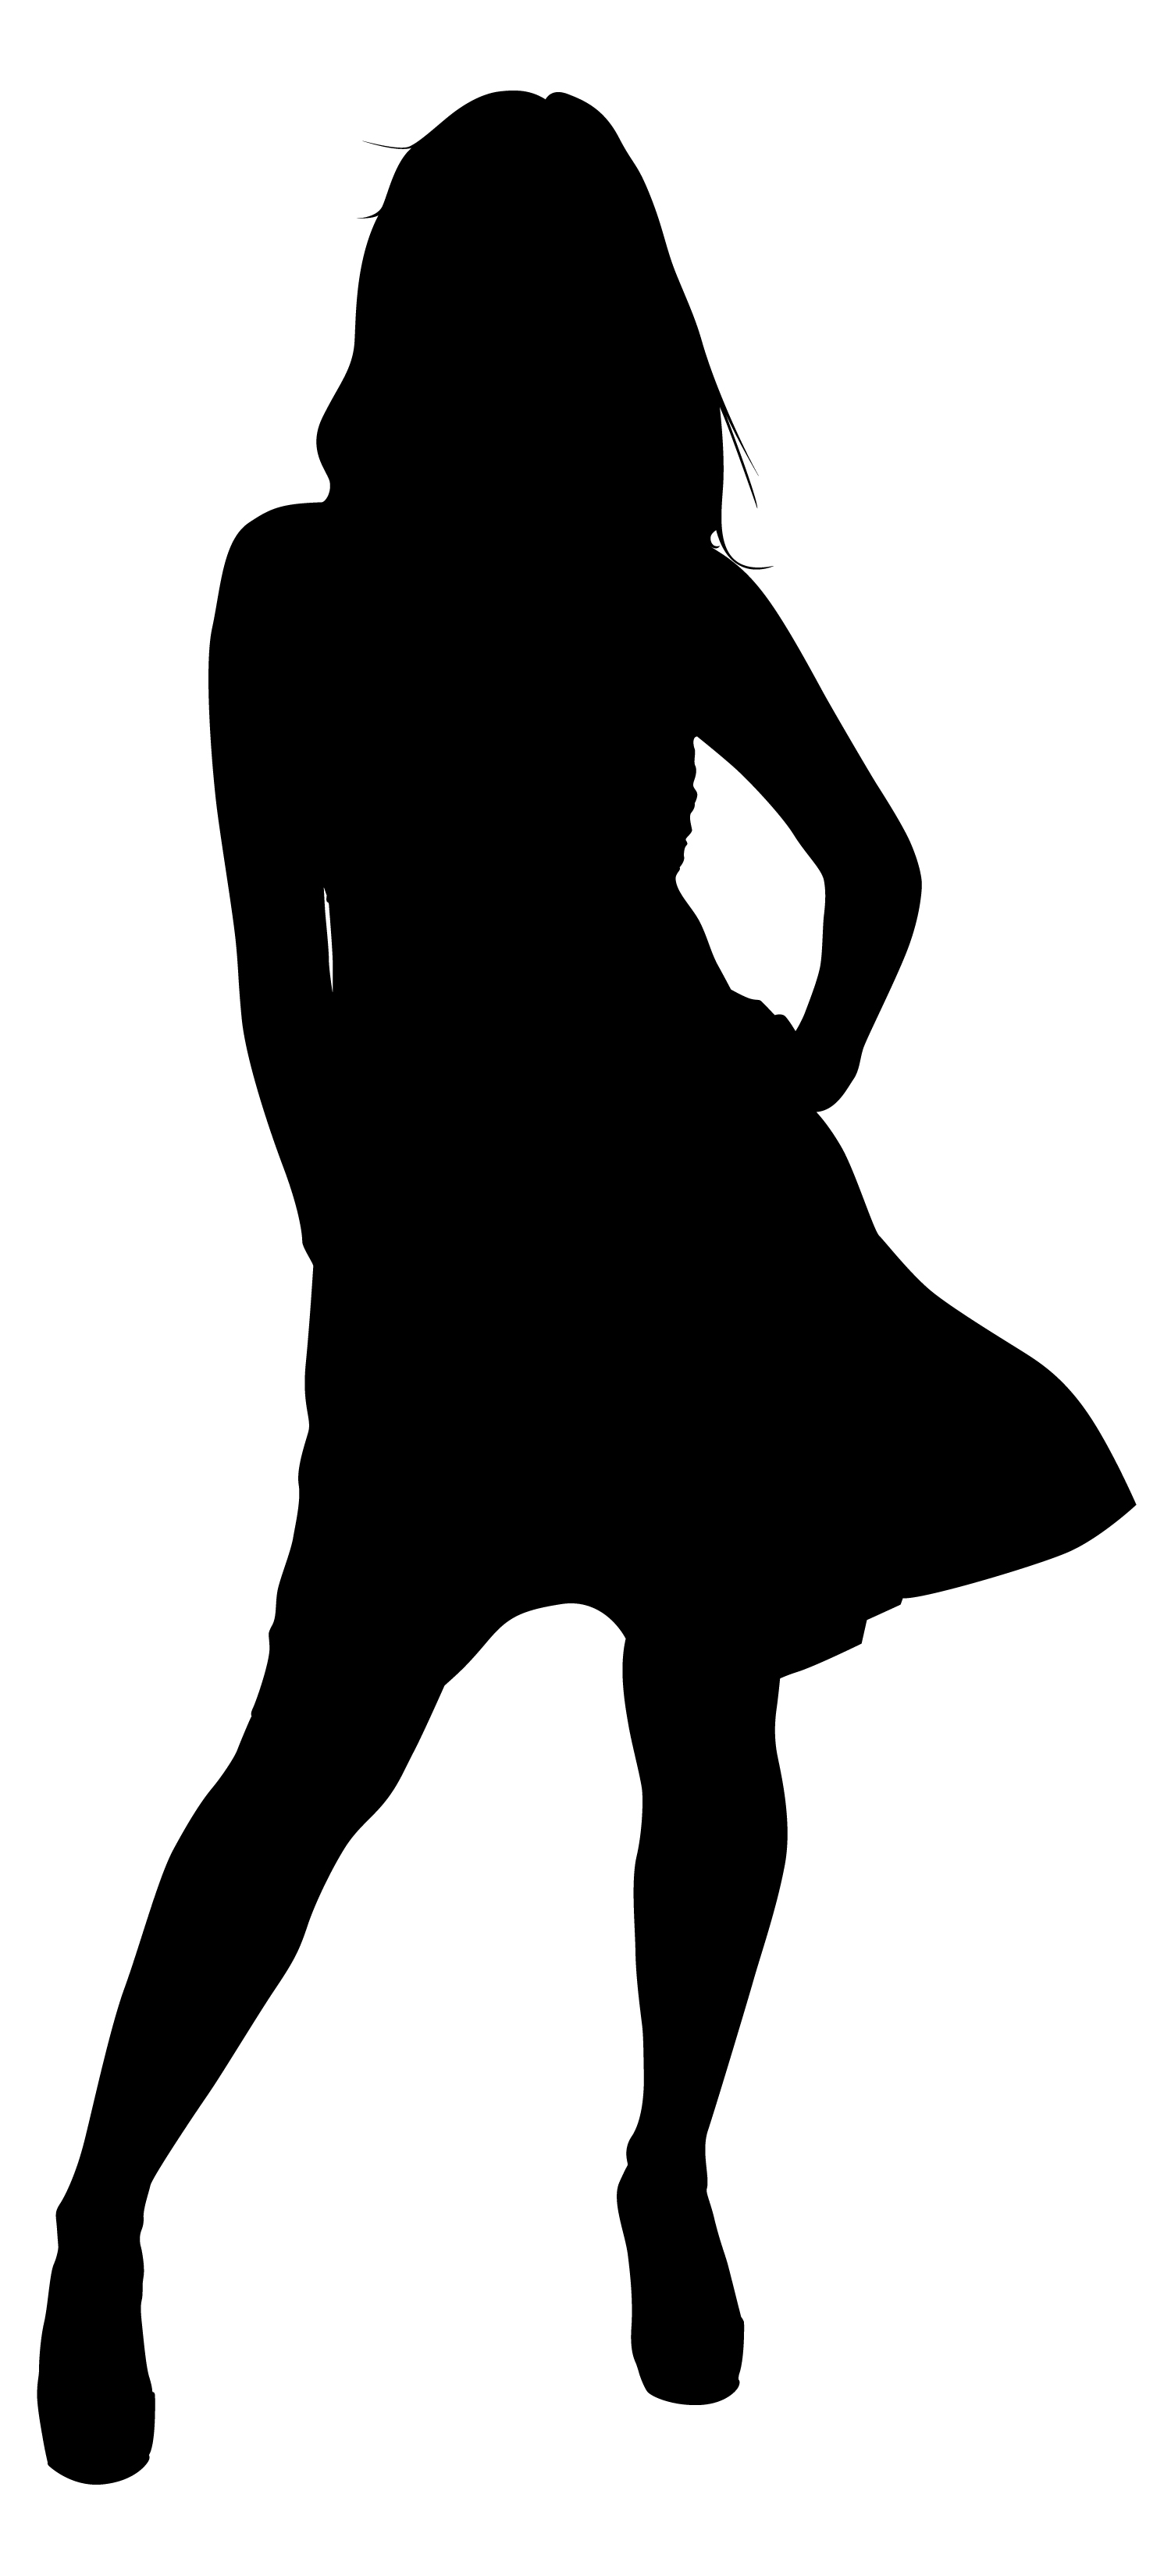 Royalty Free Shirtless Asian Male Teen Silhouette Pic - vrogue.co